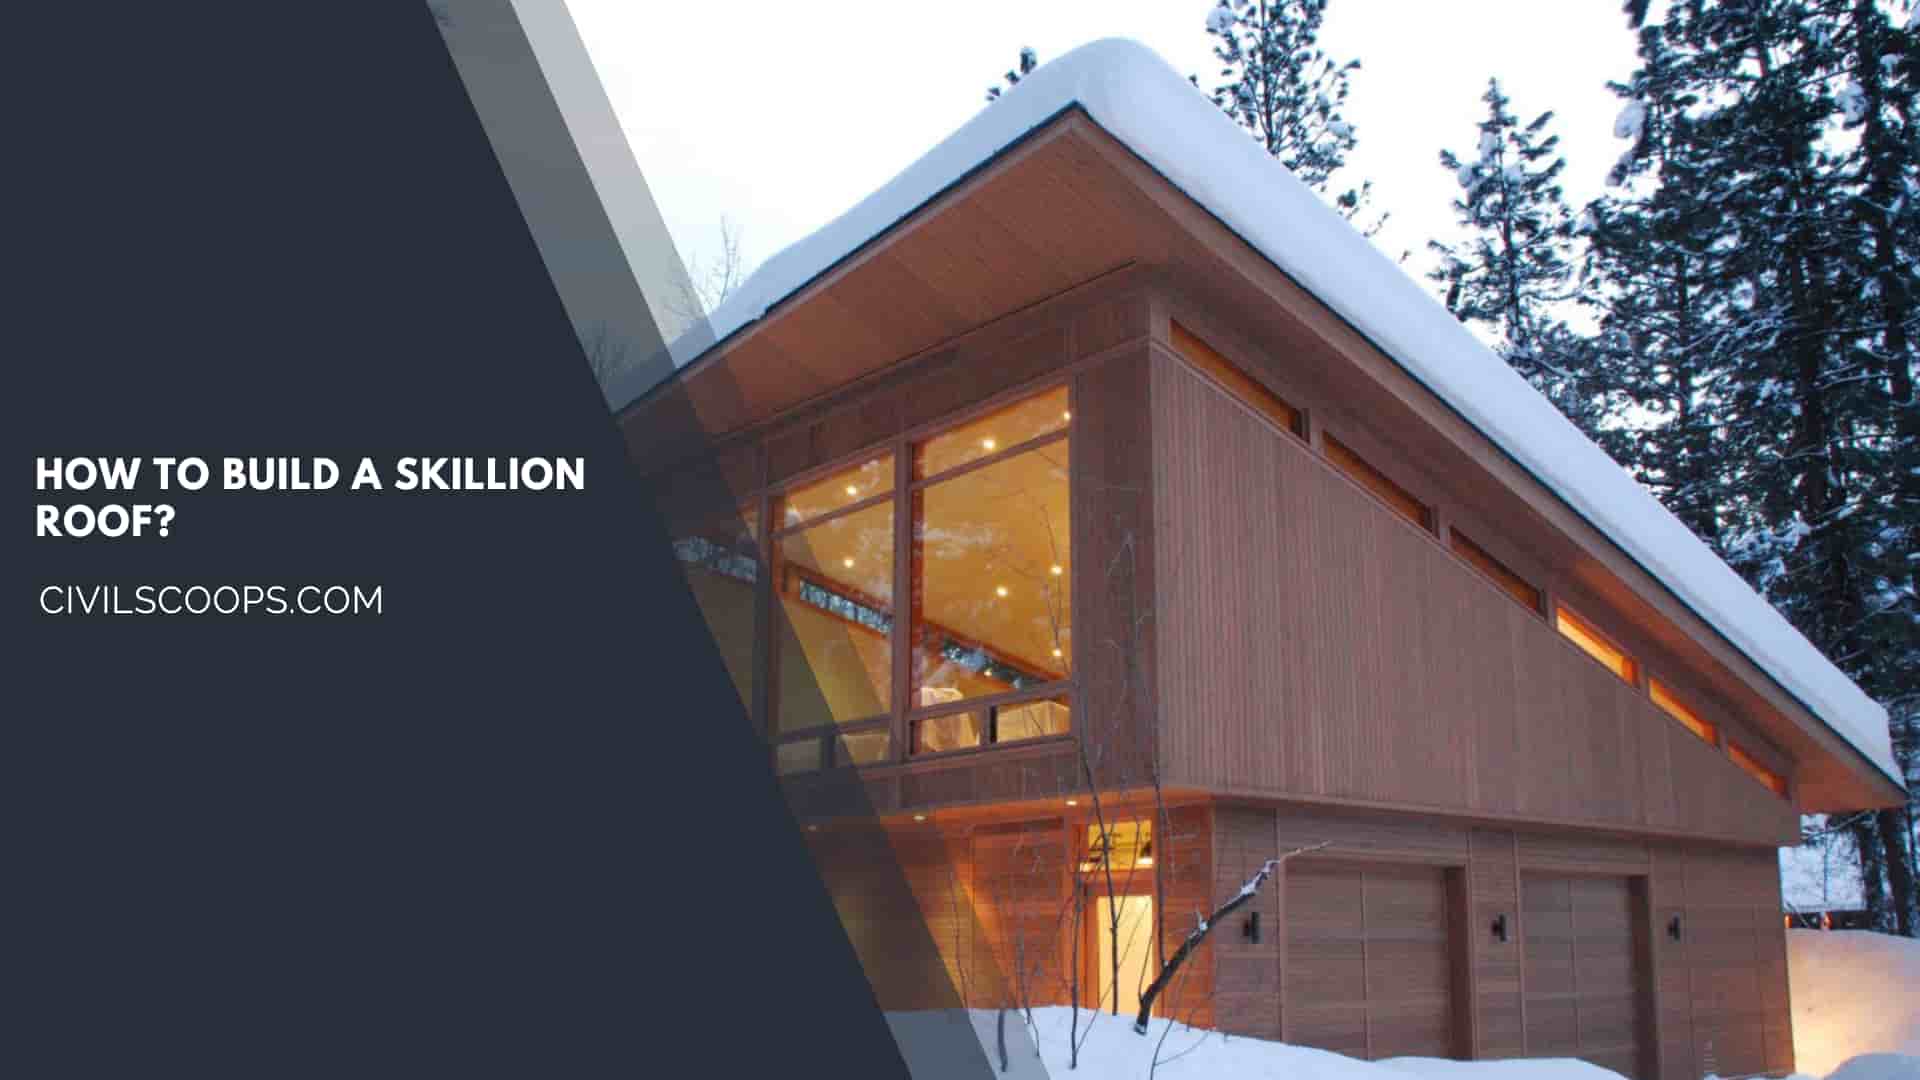 How to Build a Skillion Roof?